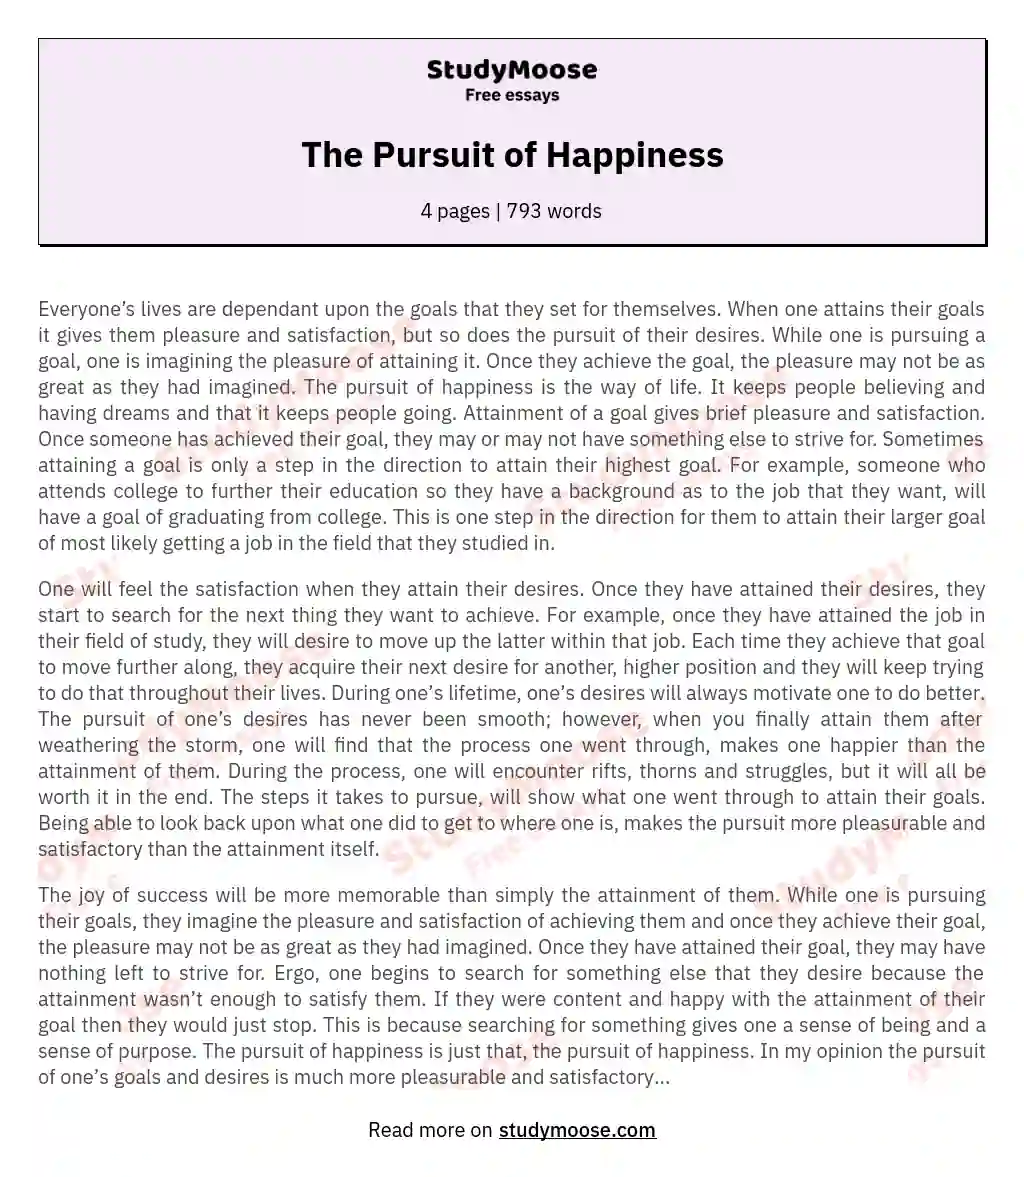 The Pursuit of Happiness essay